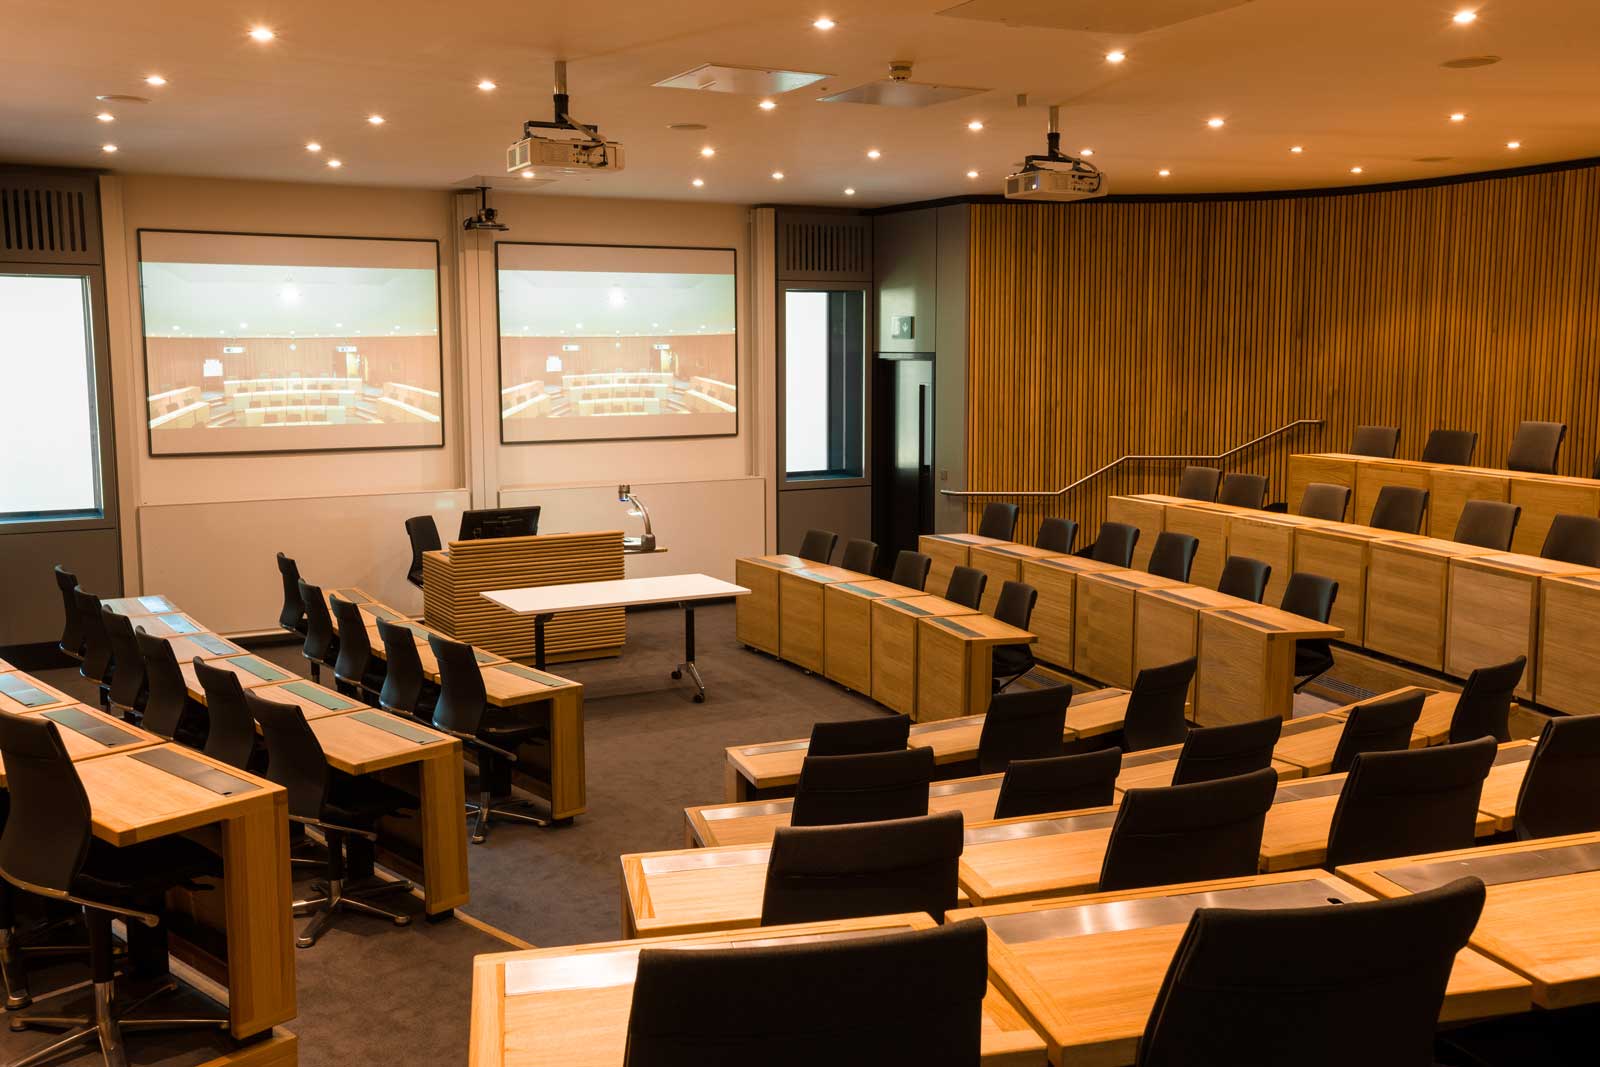 The Harvard Lecture Theatre at Saïd Business School